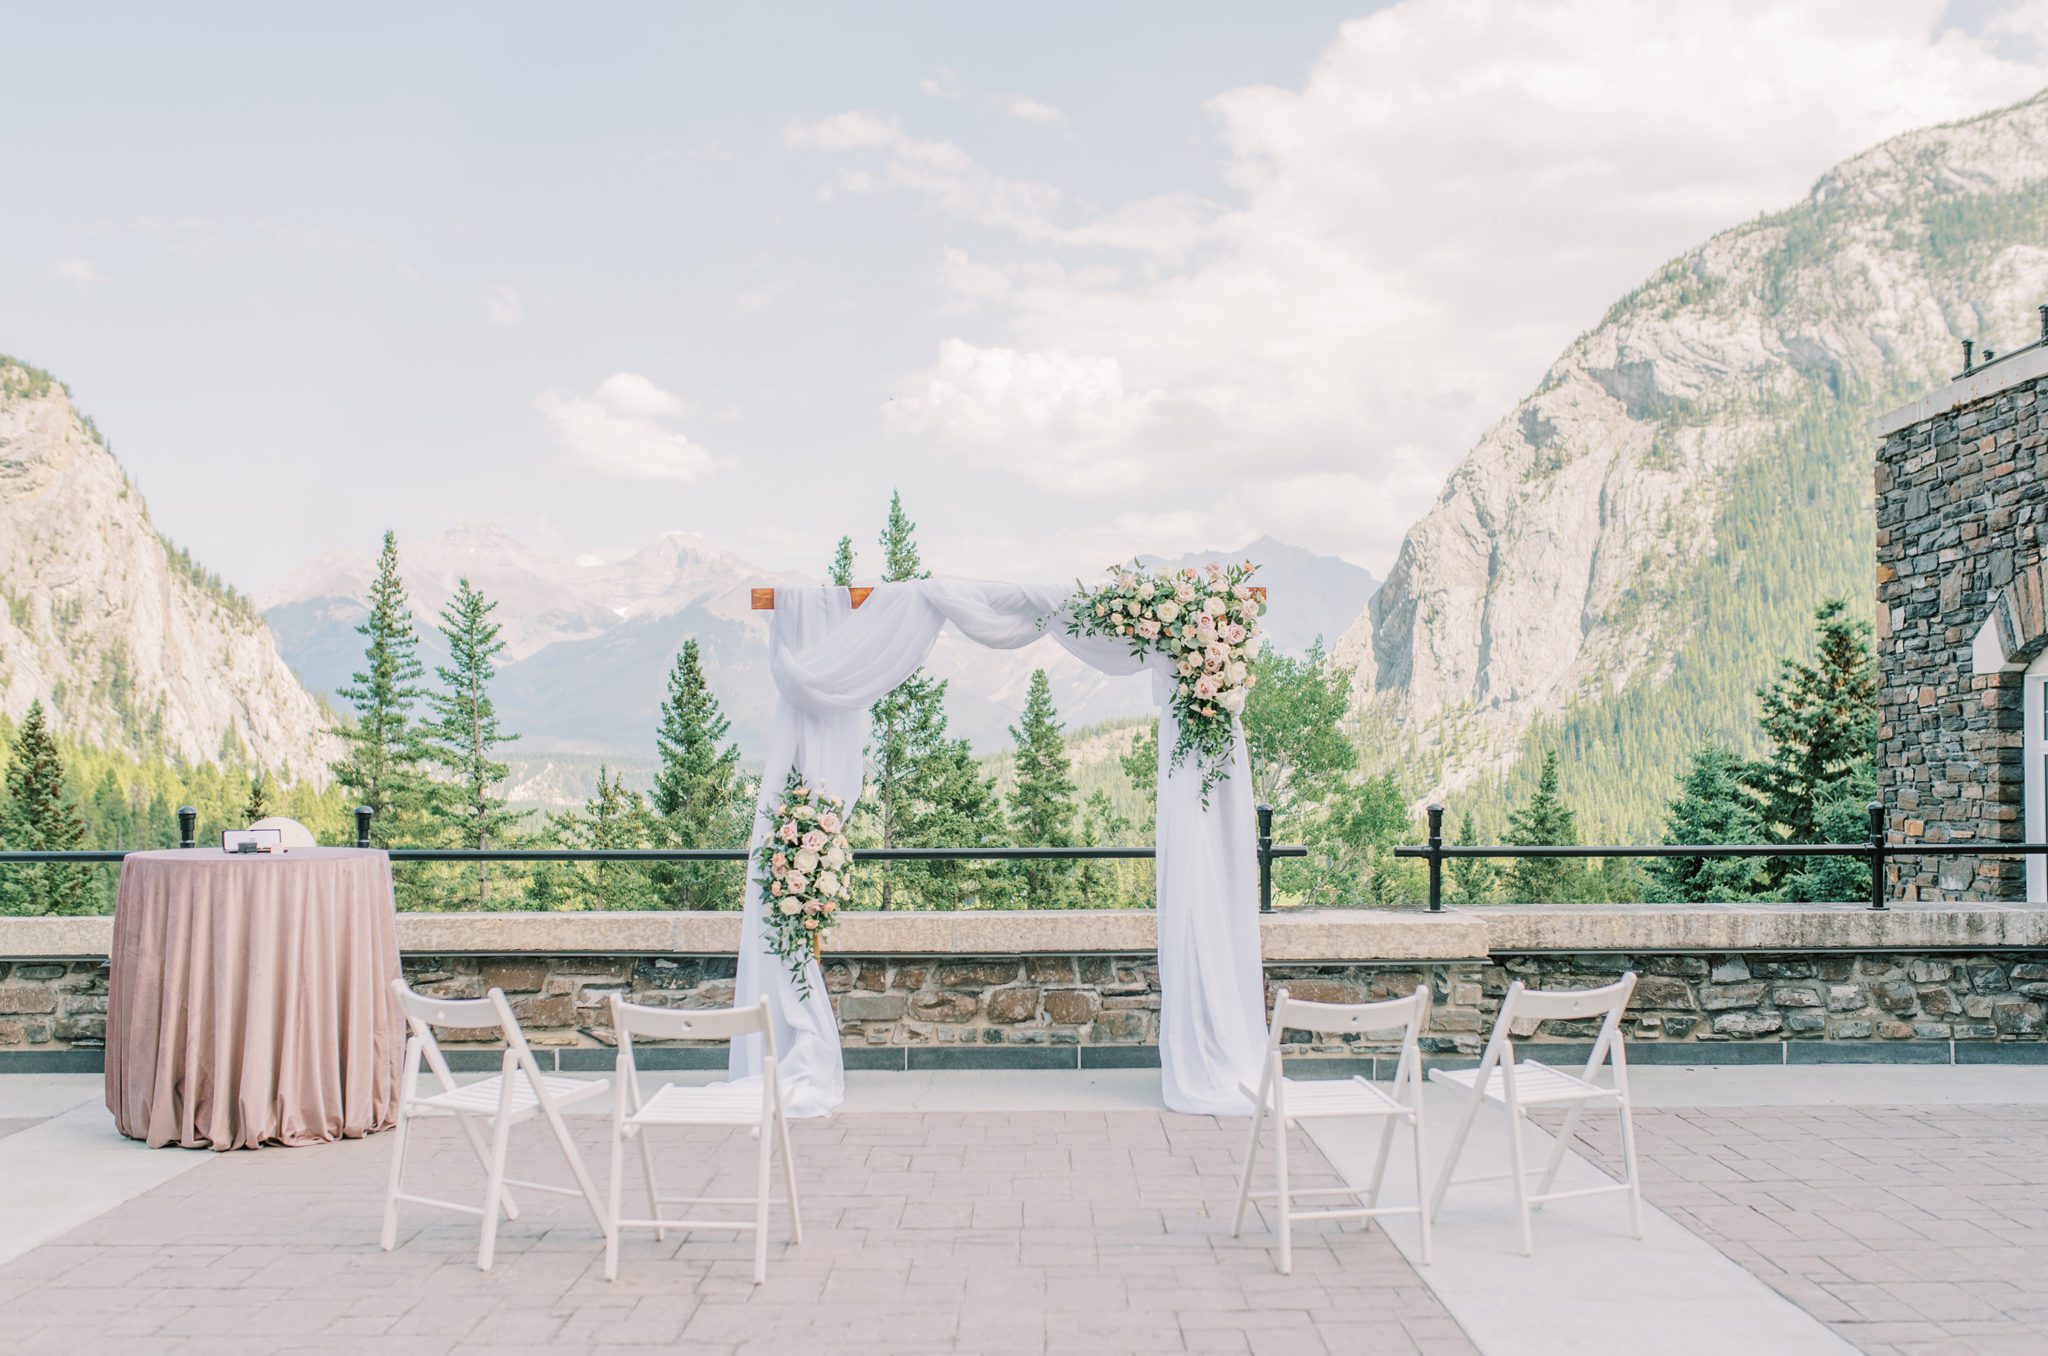 Feminine and airy wedding decor inspiration on the patio at the Fairmont Banff Springs Hotel in Banff Alberta